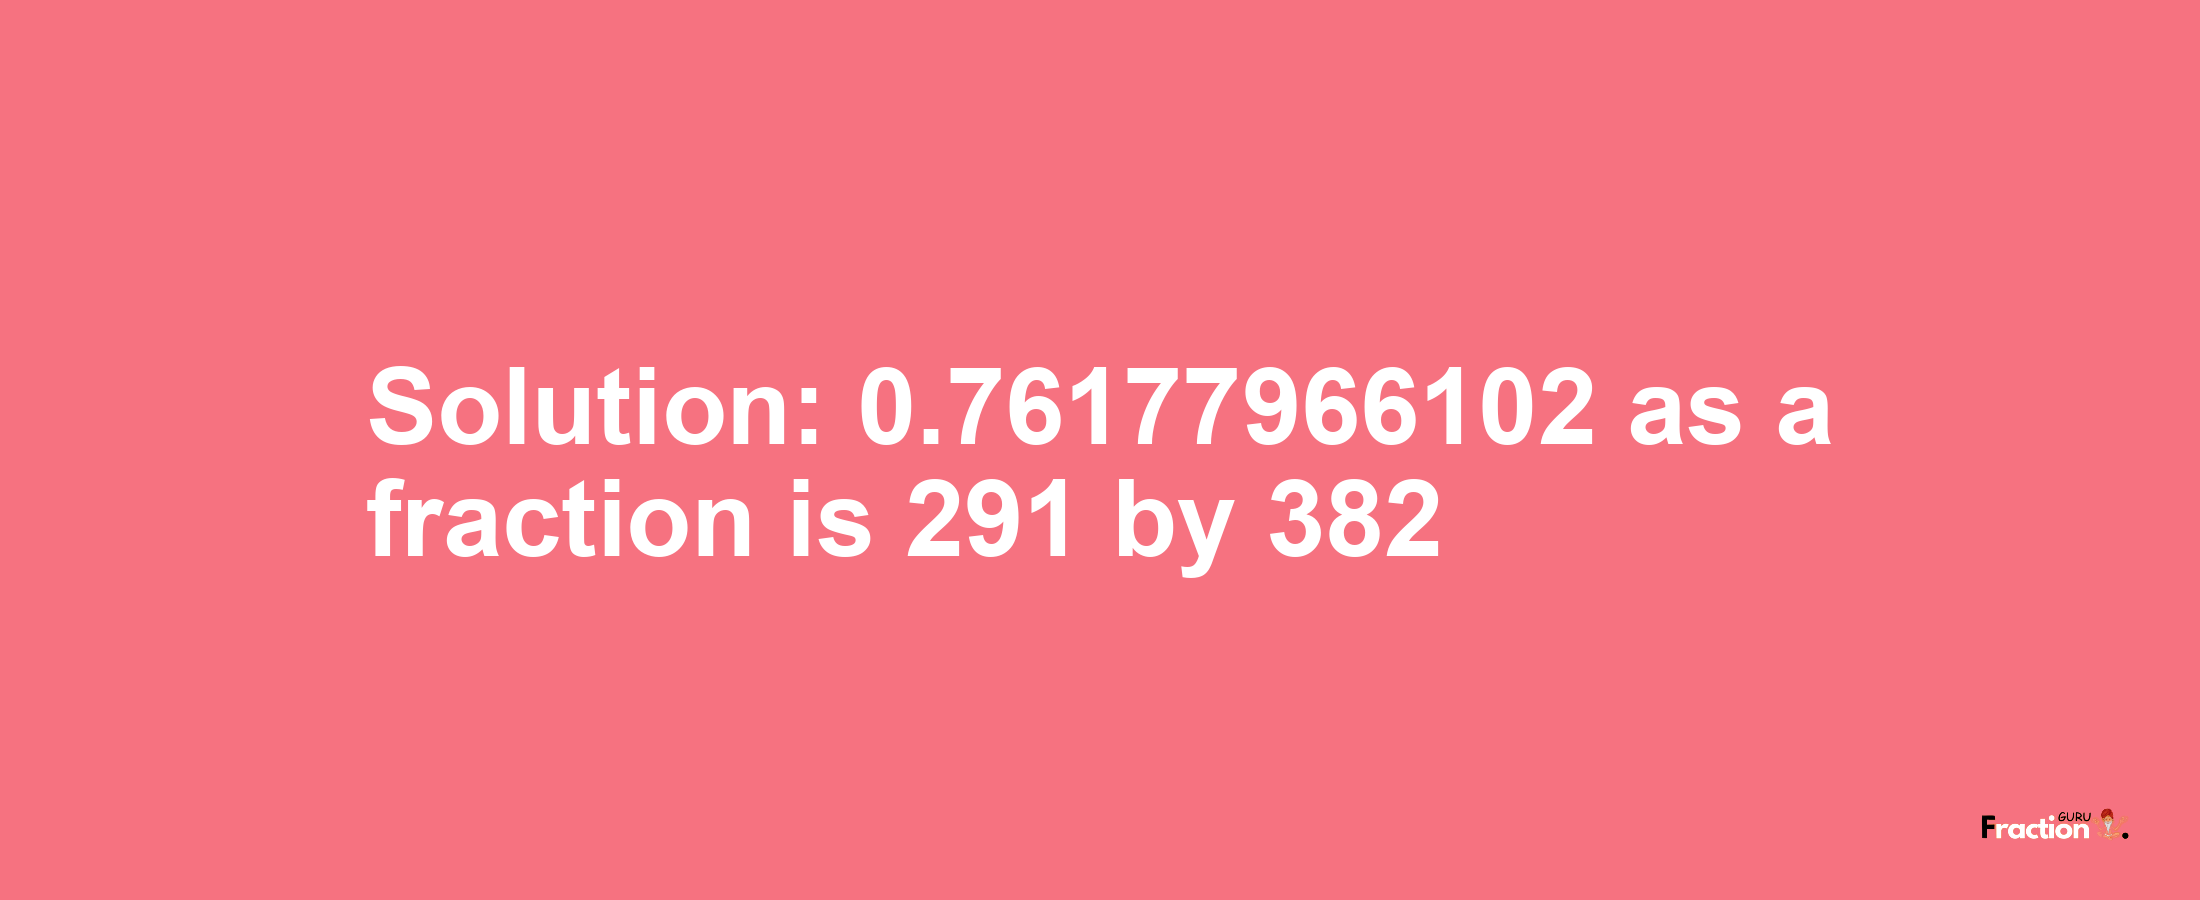 Solution:0.76177966102 as a fraction is 291/382